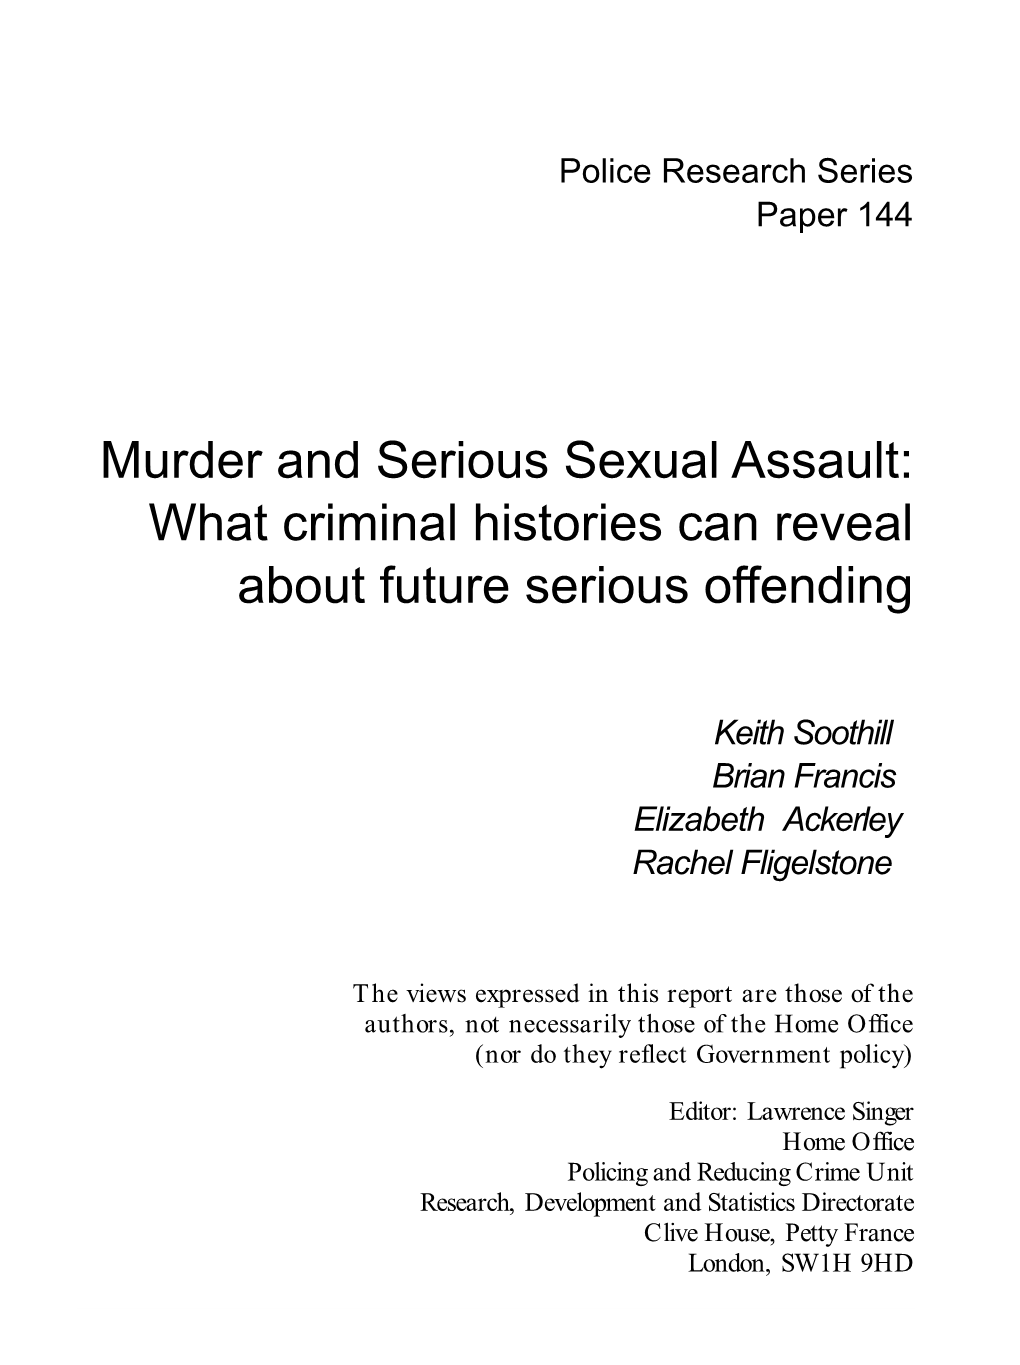 Murder and Serious Sexual Assault: What Criminal Histories Can Reveal About Future Serious Offending